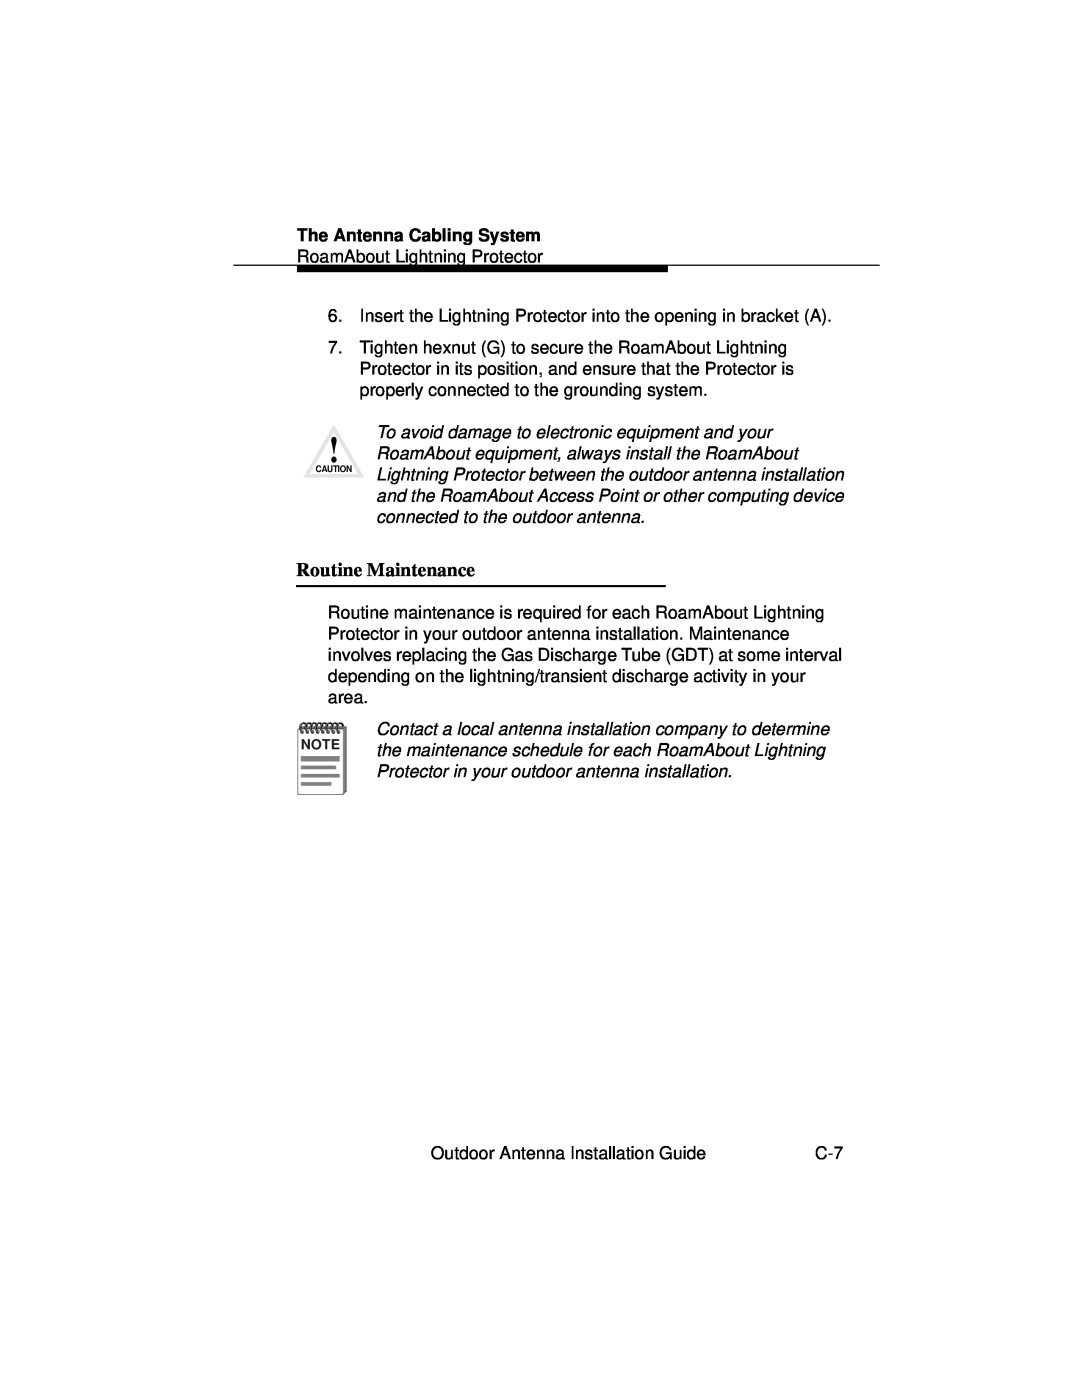 Cabletron Systems 9033073 manual Routine Maintenance, The Antenna Cabling System 